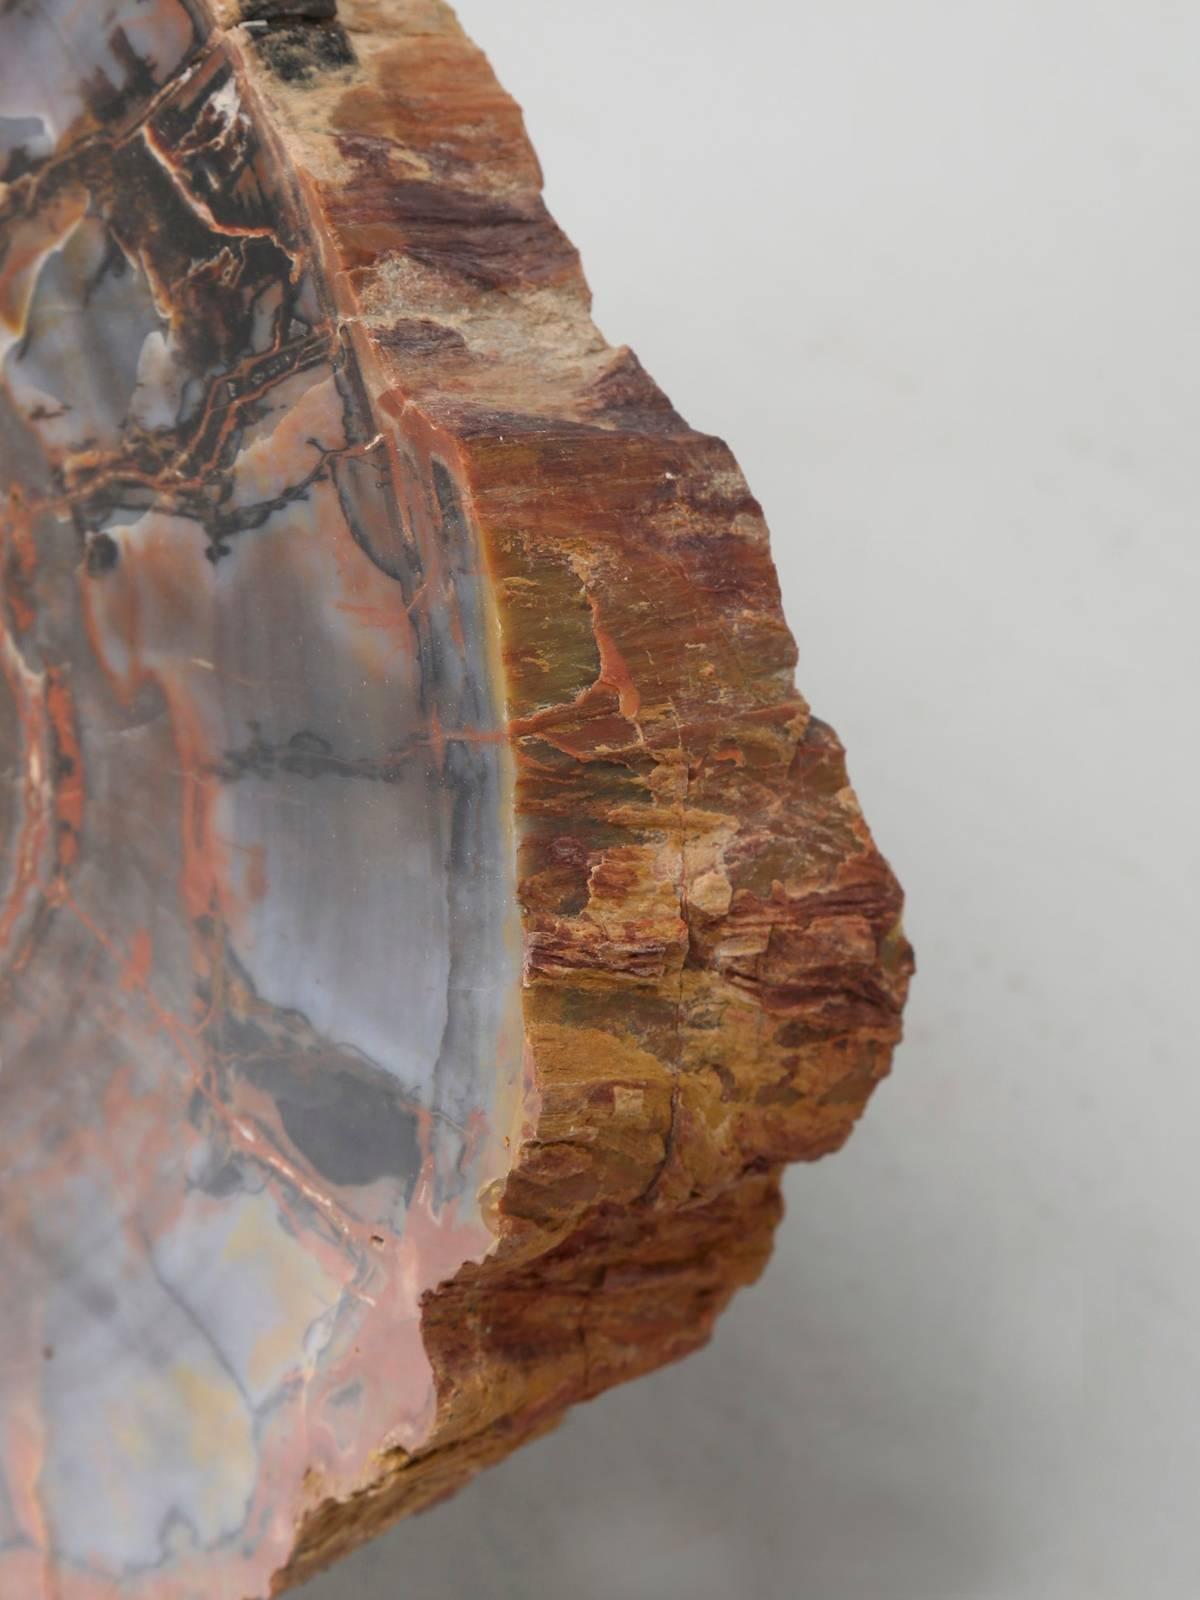 Petrified Wood from Petrified Forest in Arizona 2